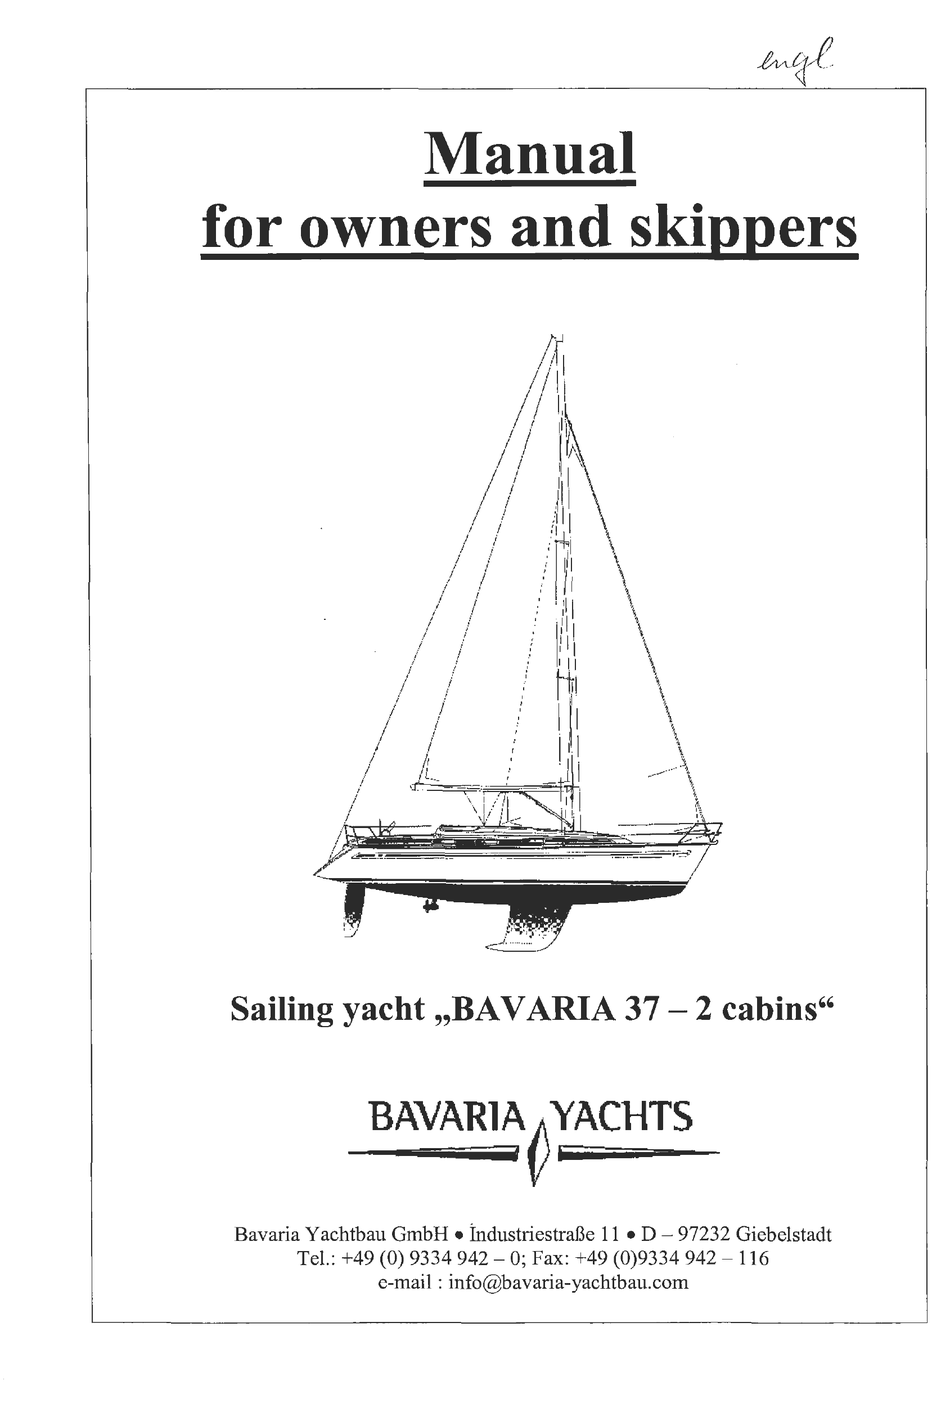 bavaria yacht owners manual